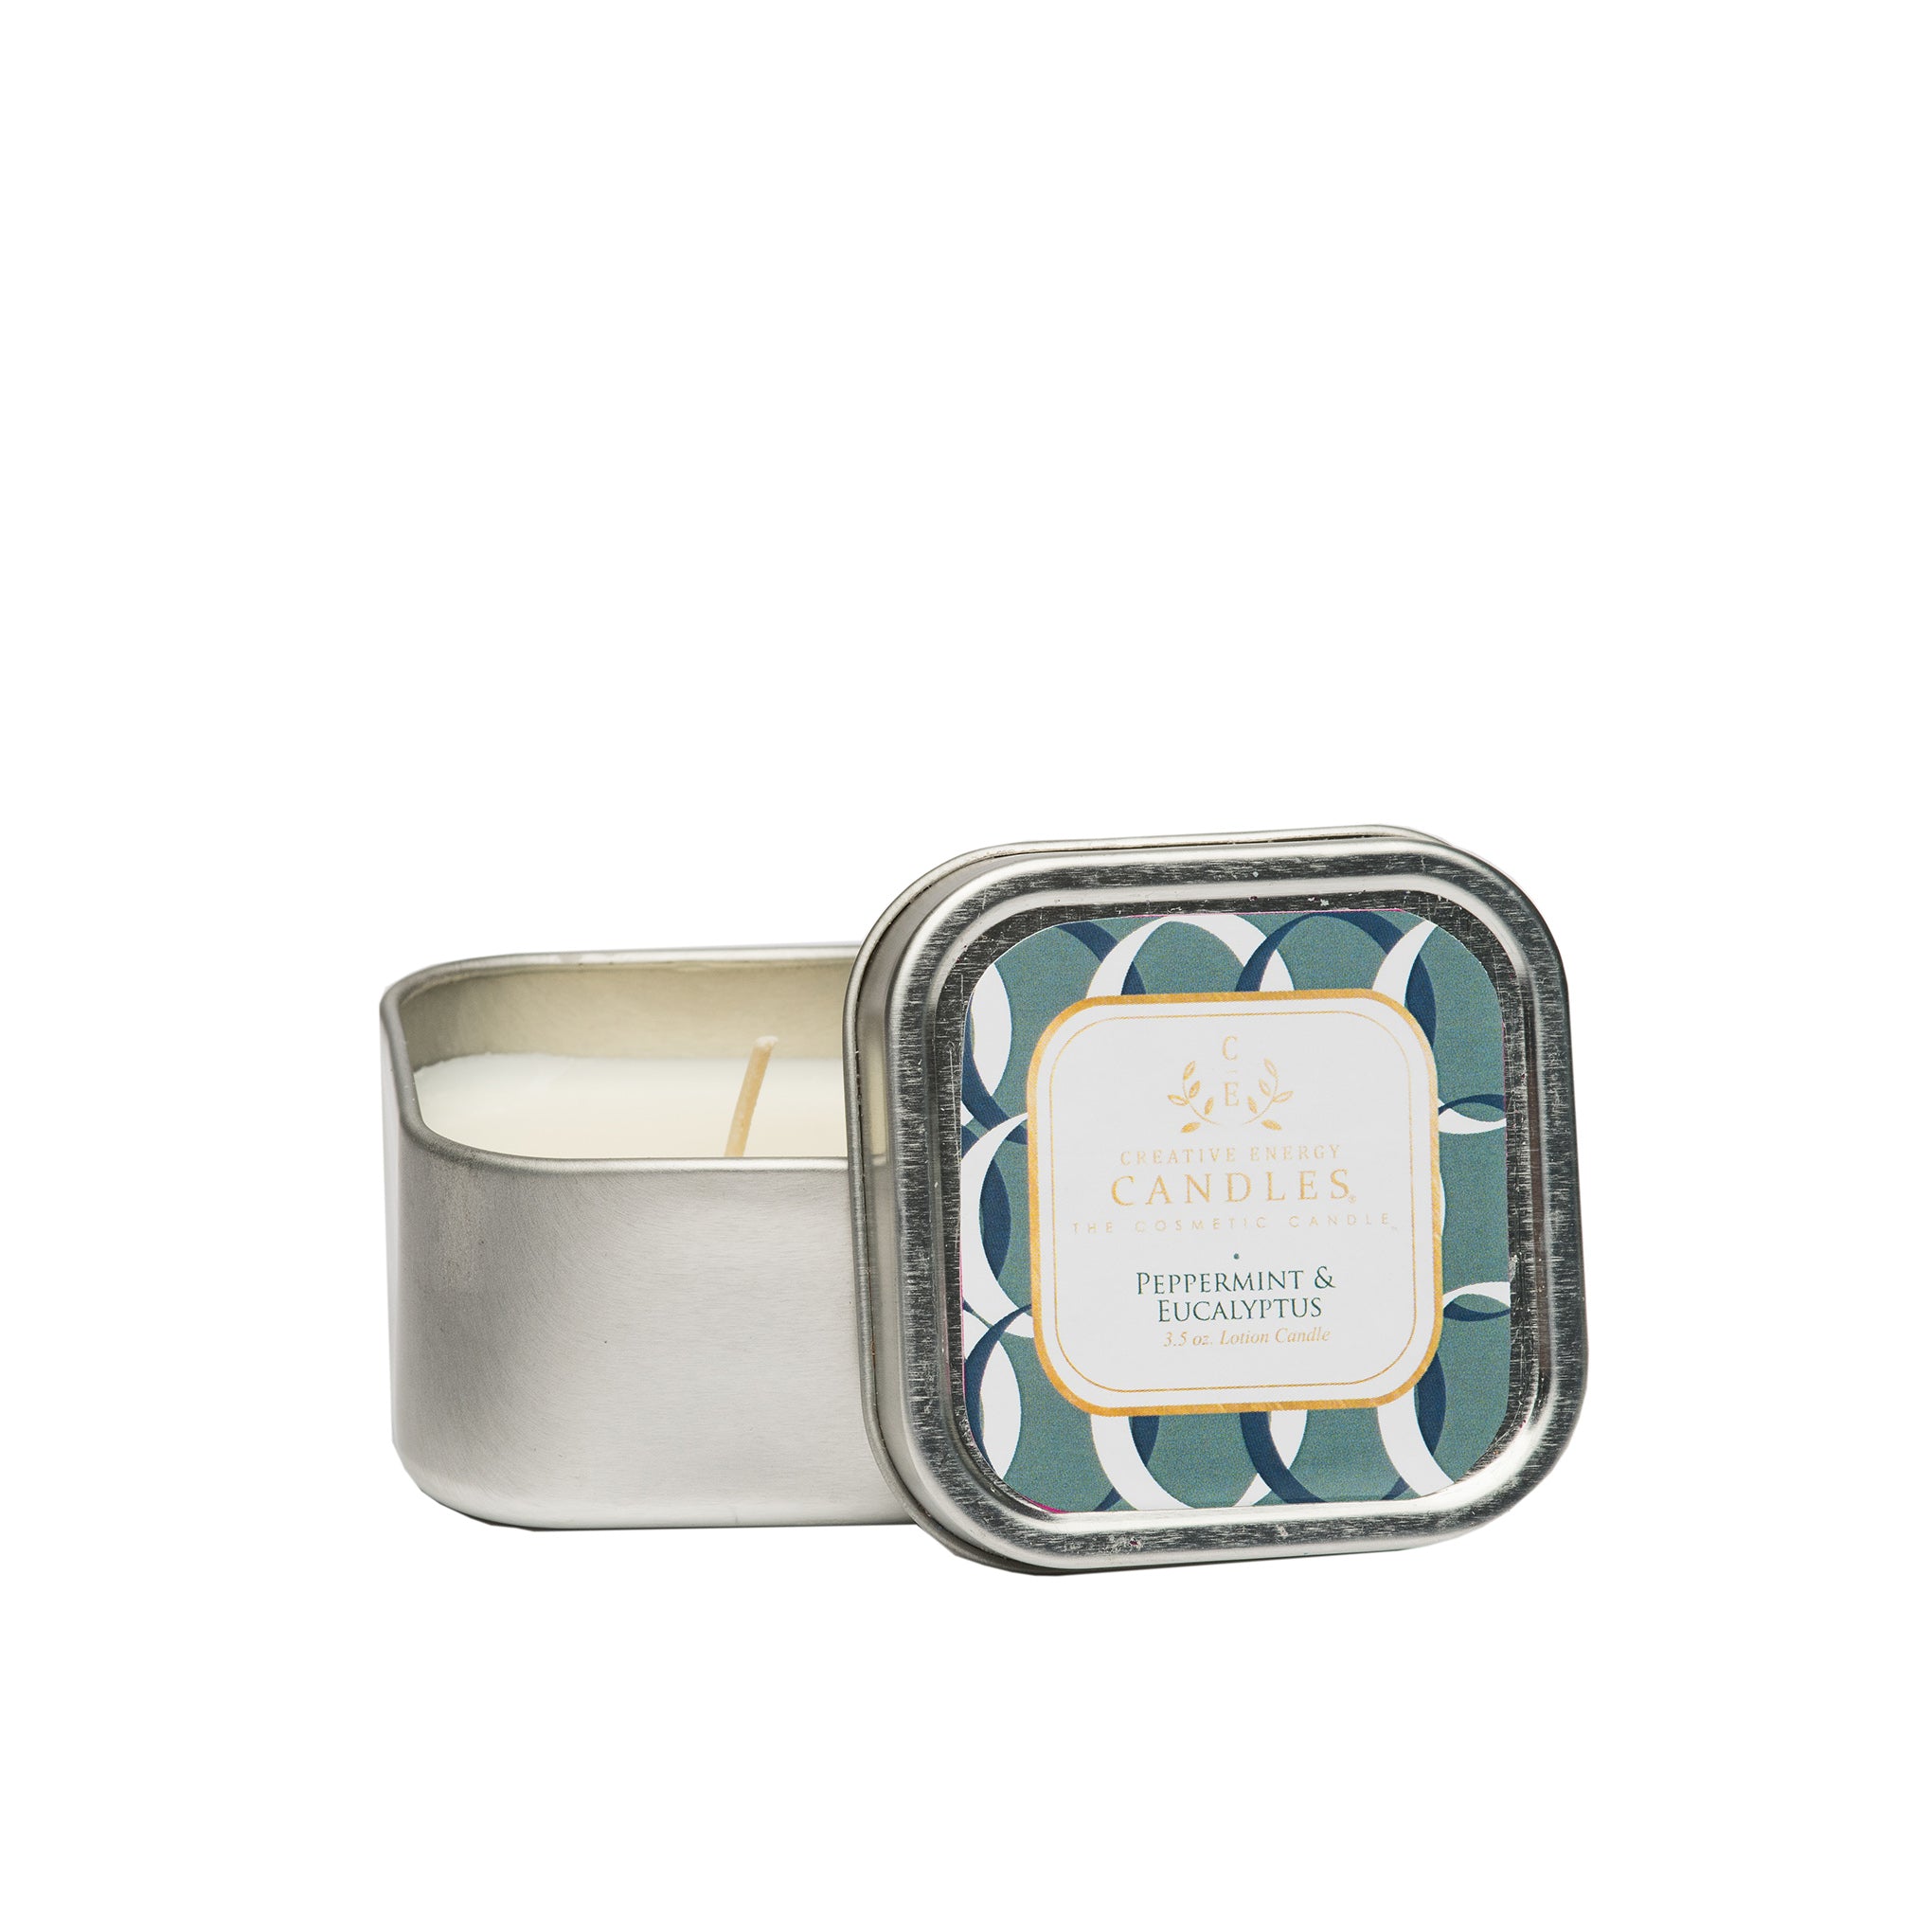 Peppermint & Eucalyptus Soy Lotion Candle